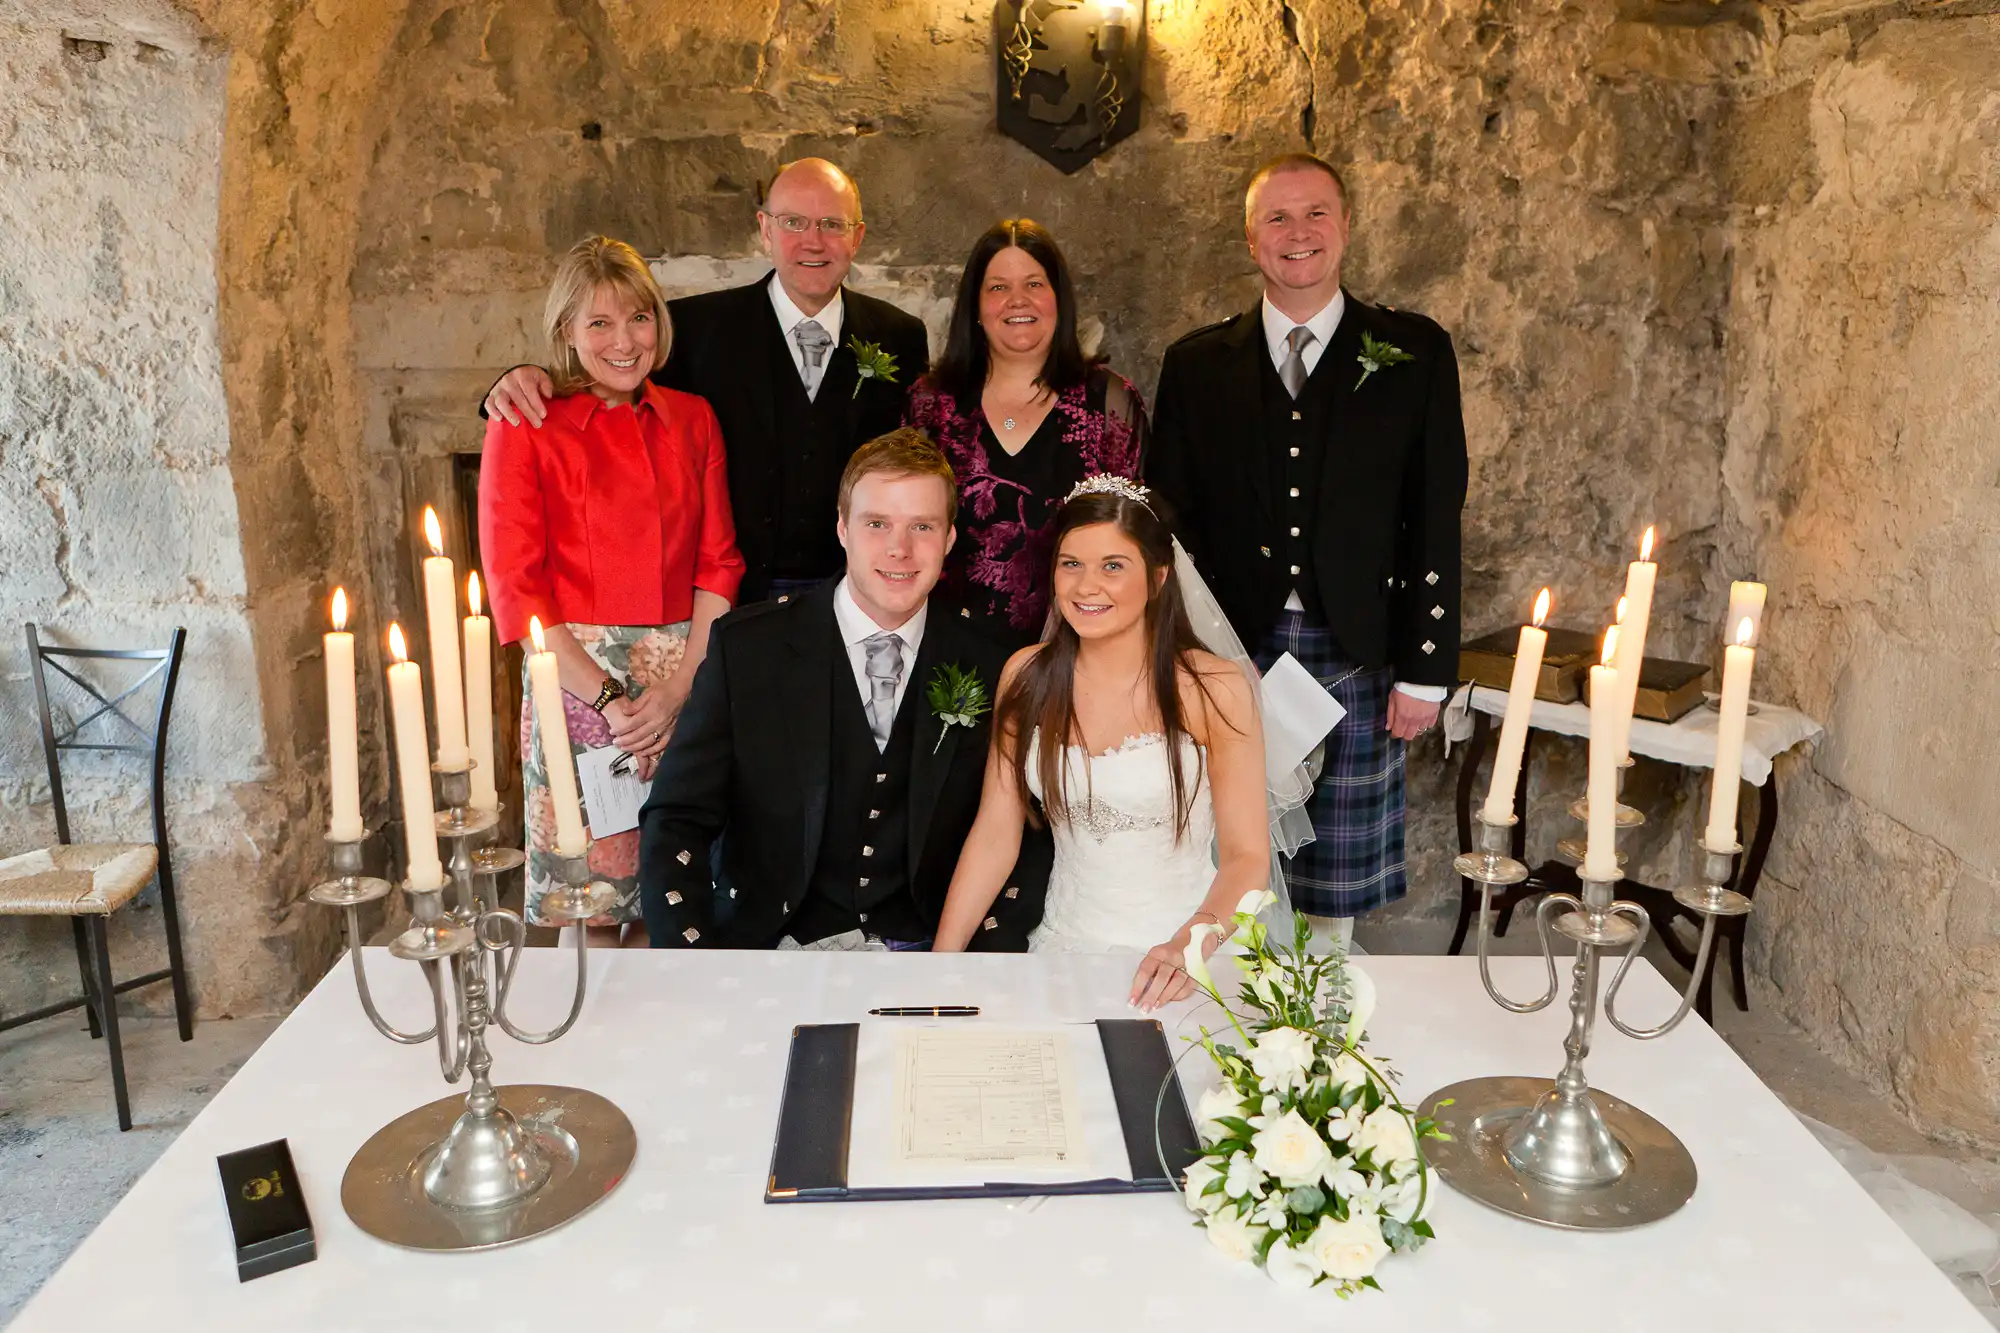 A newlywed couple signing a marriage register at a table adorned with candles and flowers, accompanied by four smiling guests in formal attire.